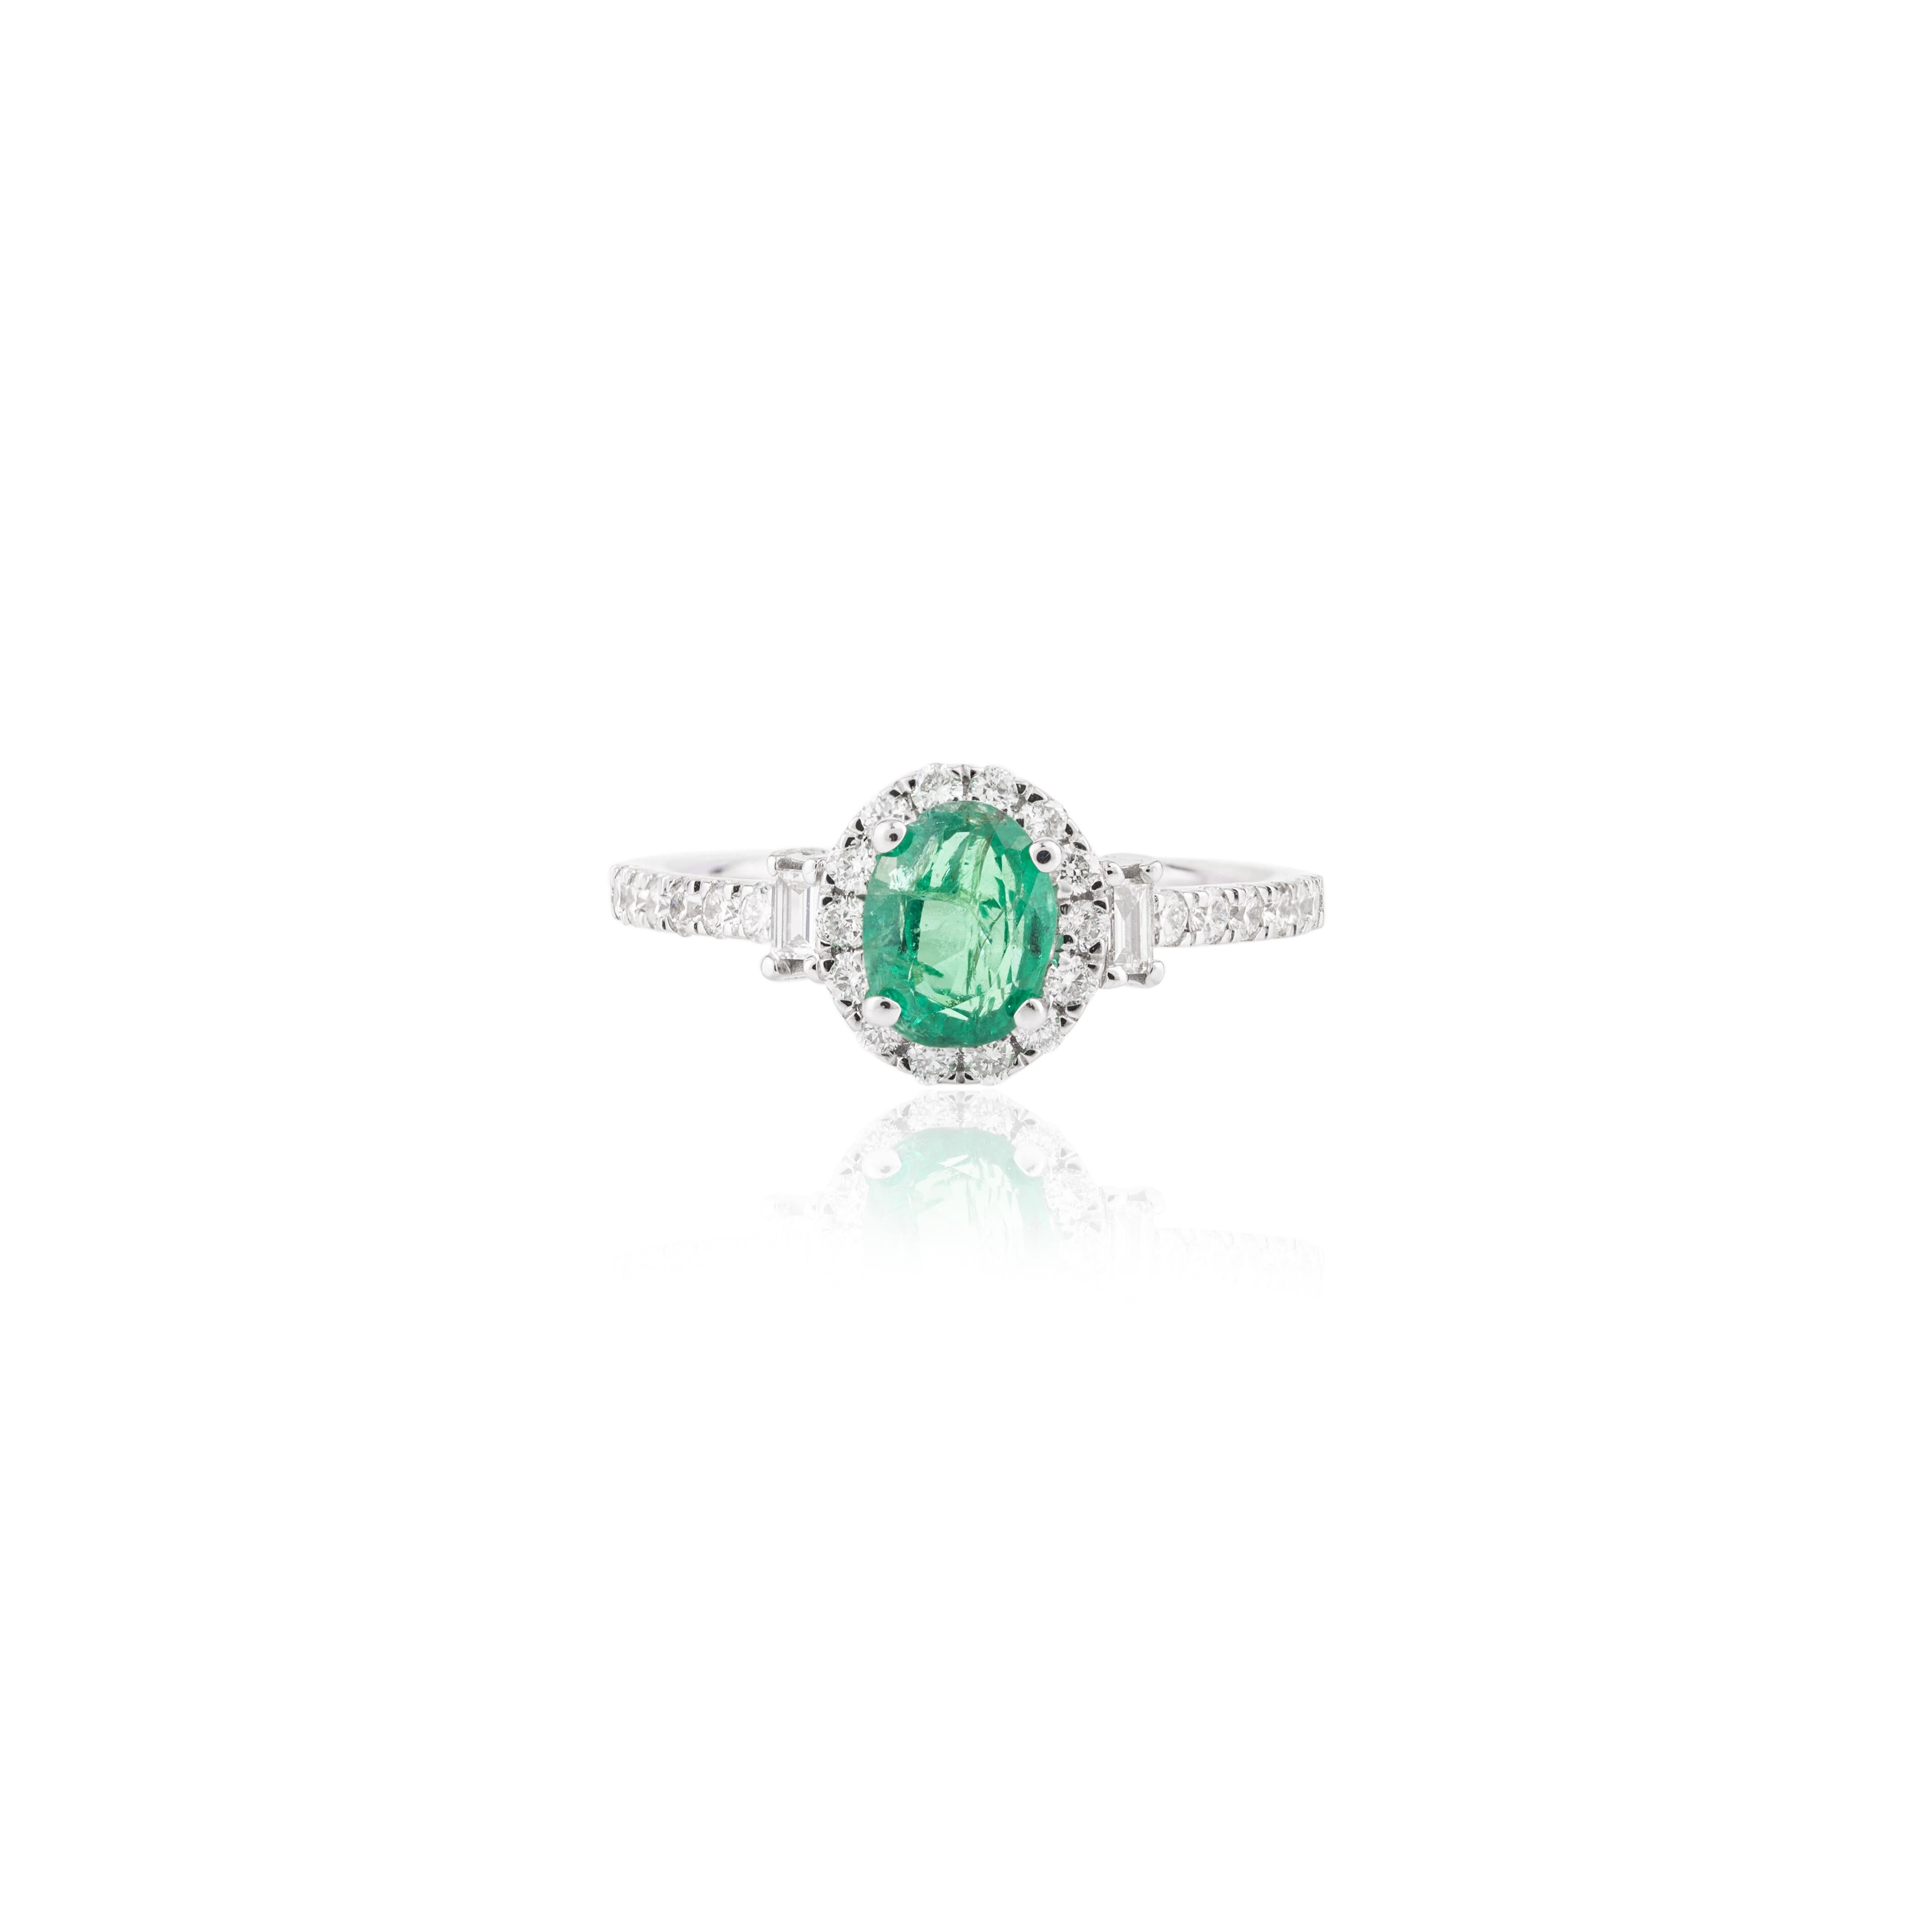 For Sale:  18 Karat White Gold Diamond Halo Emerald Engagement Ring for Her 3